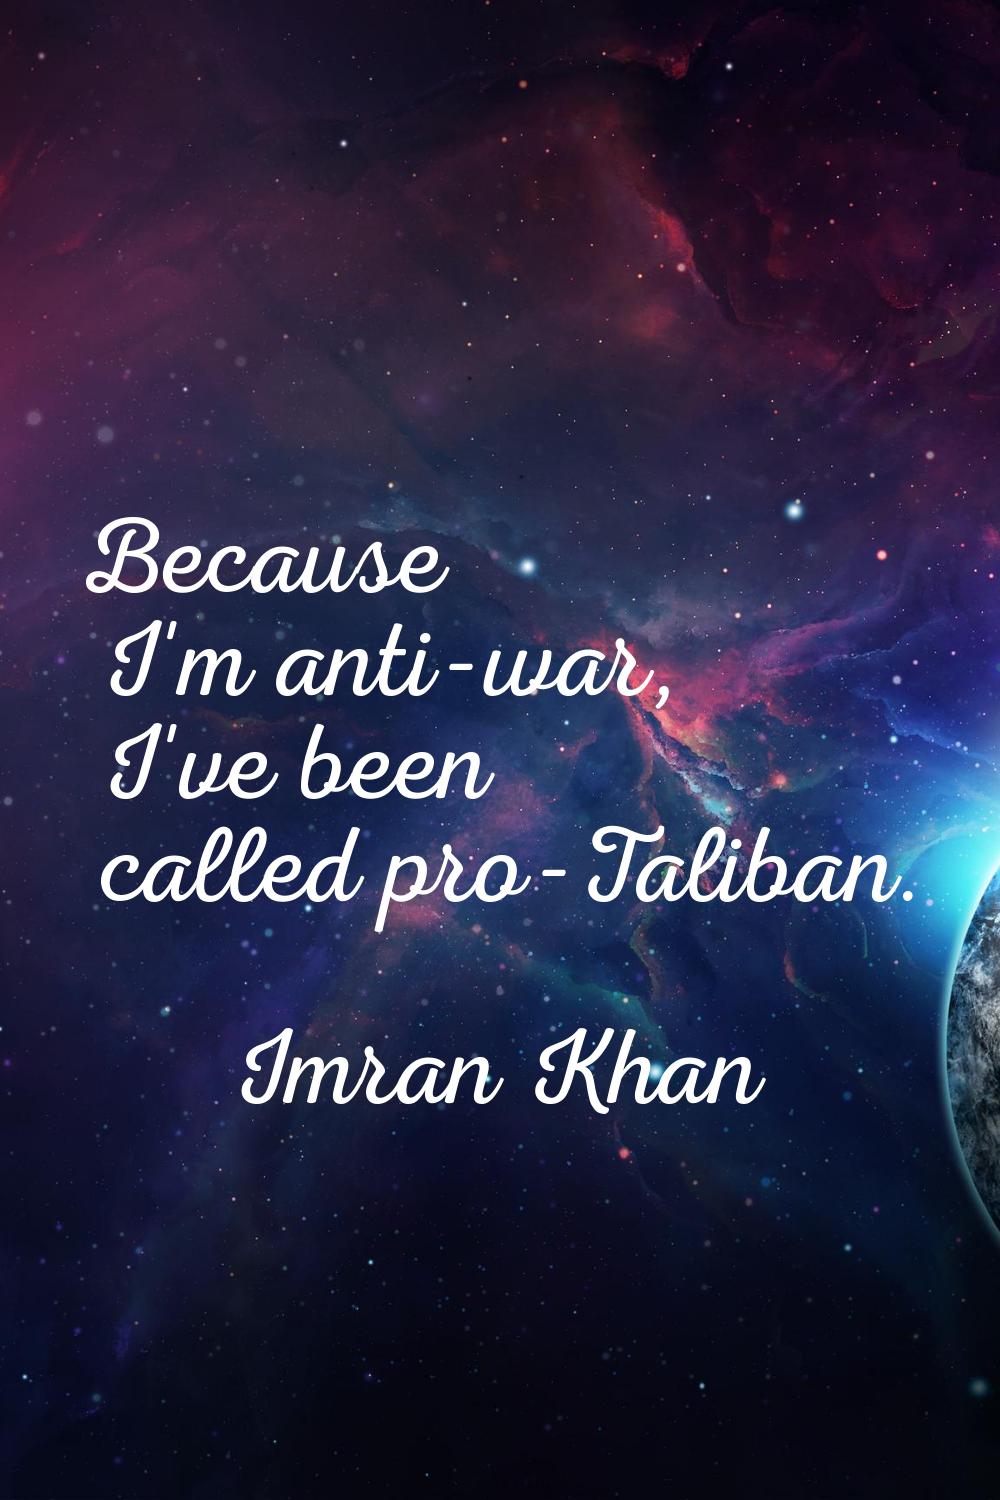 Because I'm anti-war, I've been called pro-Taliban.